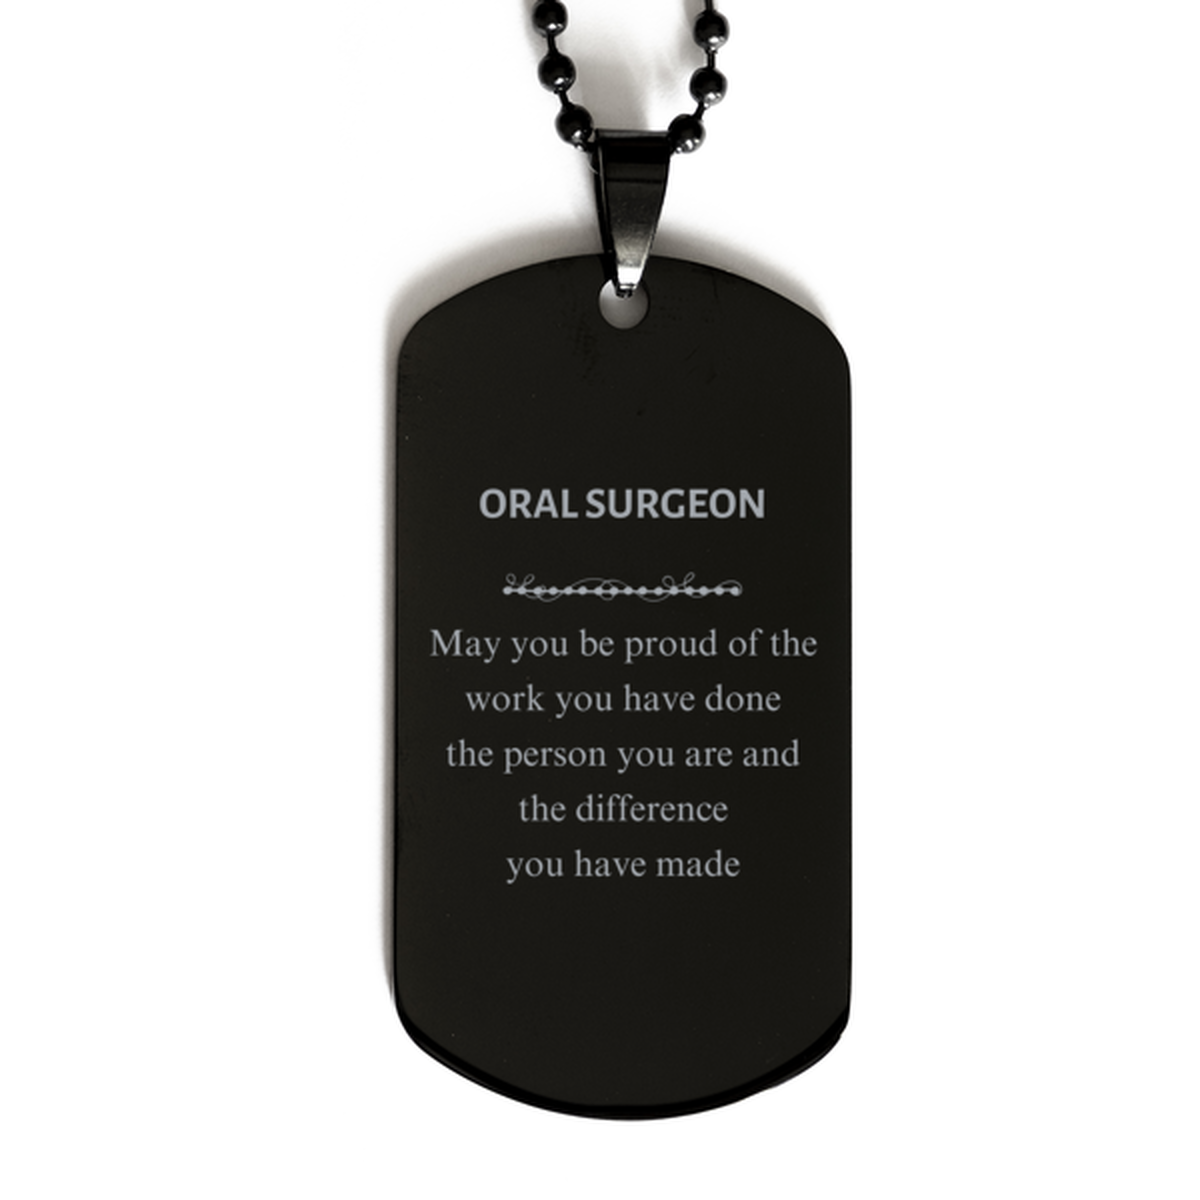 Oral Surgeon May you be proud of the work you have done, Retirement Oral Surgeon Black Dog Tag for Colleague Appreciation Gifts Amazing for Oral Surgeon